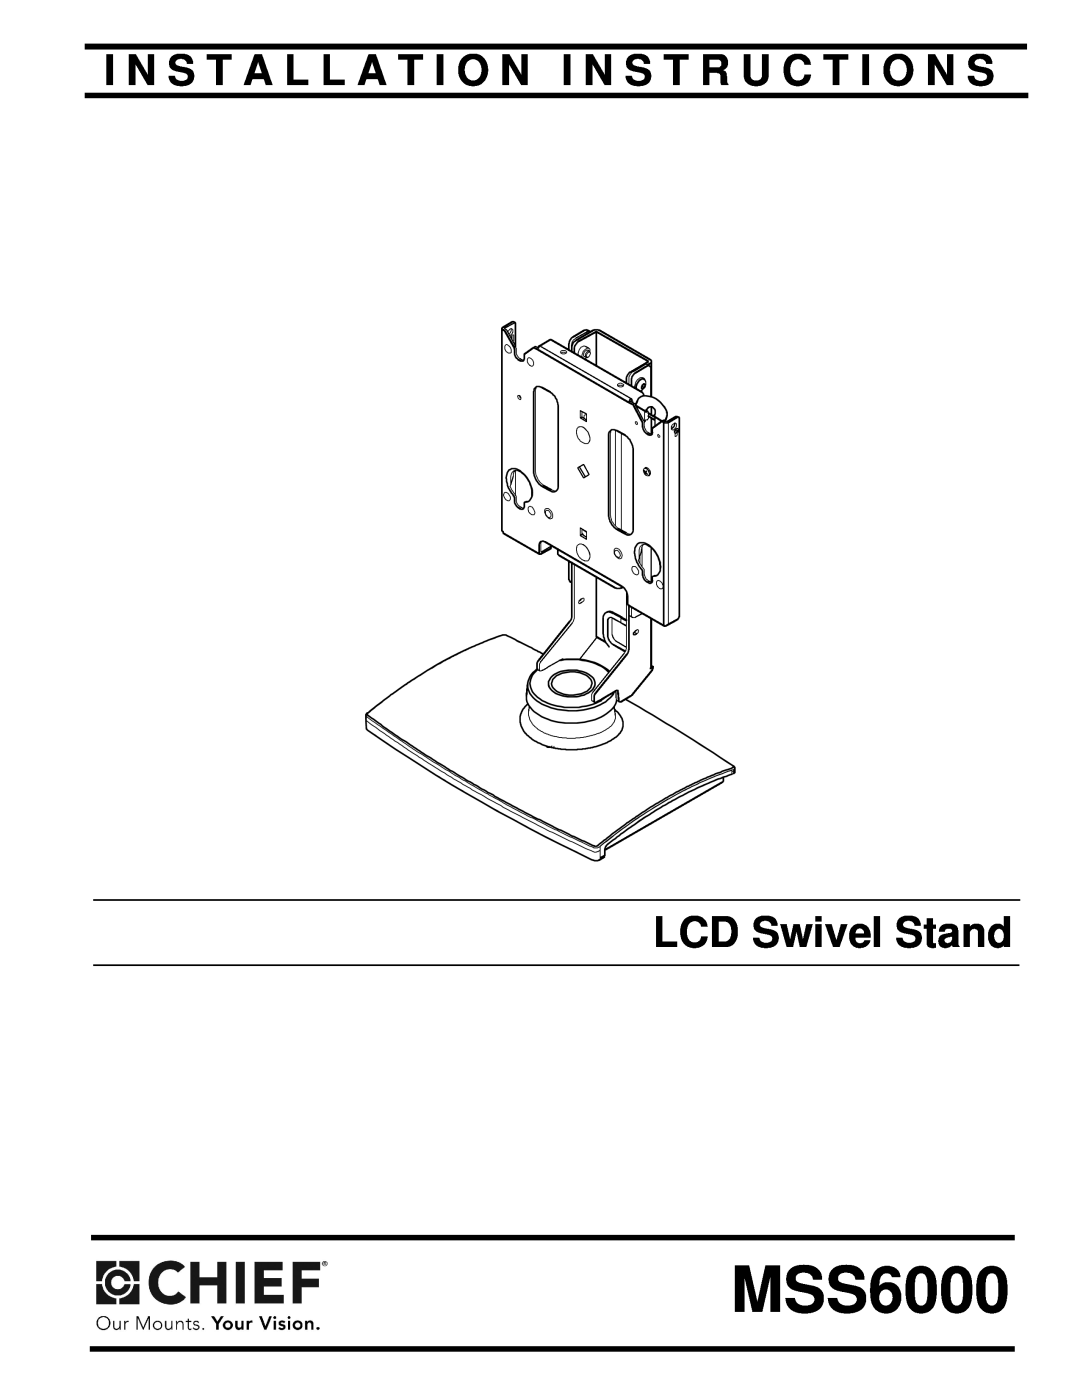 Chief Manufacturing MSS6000 installation instructions I N S T A L L A T I O N I N S T R U C T I O N S, LCD Swivel Stand 